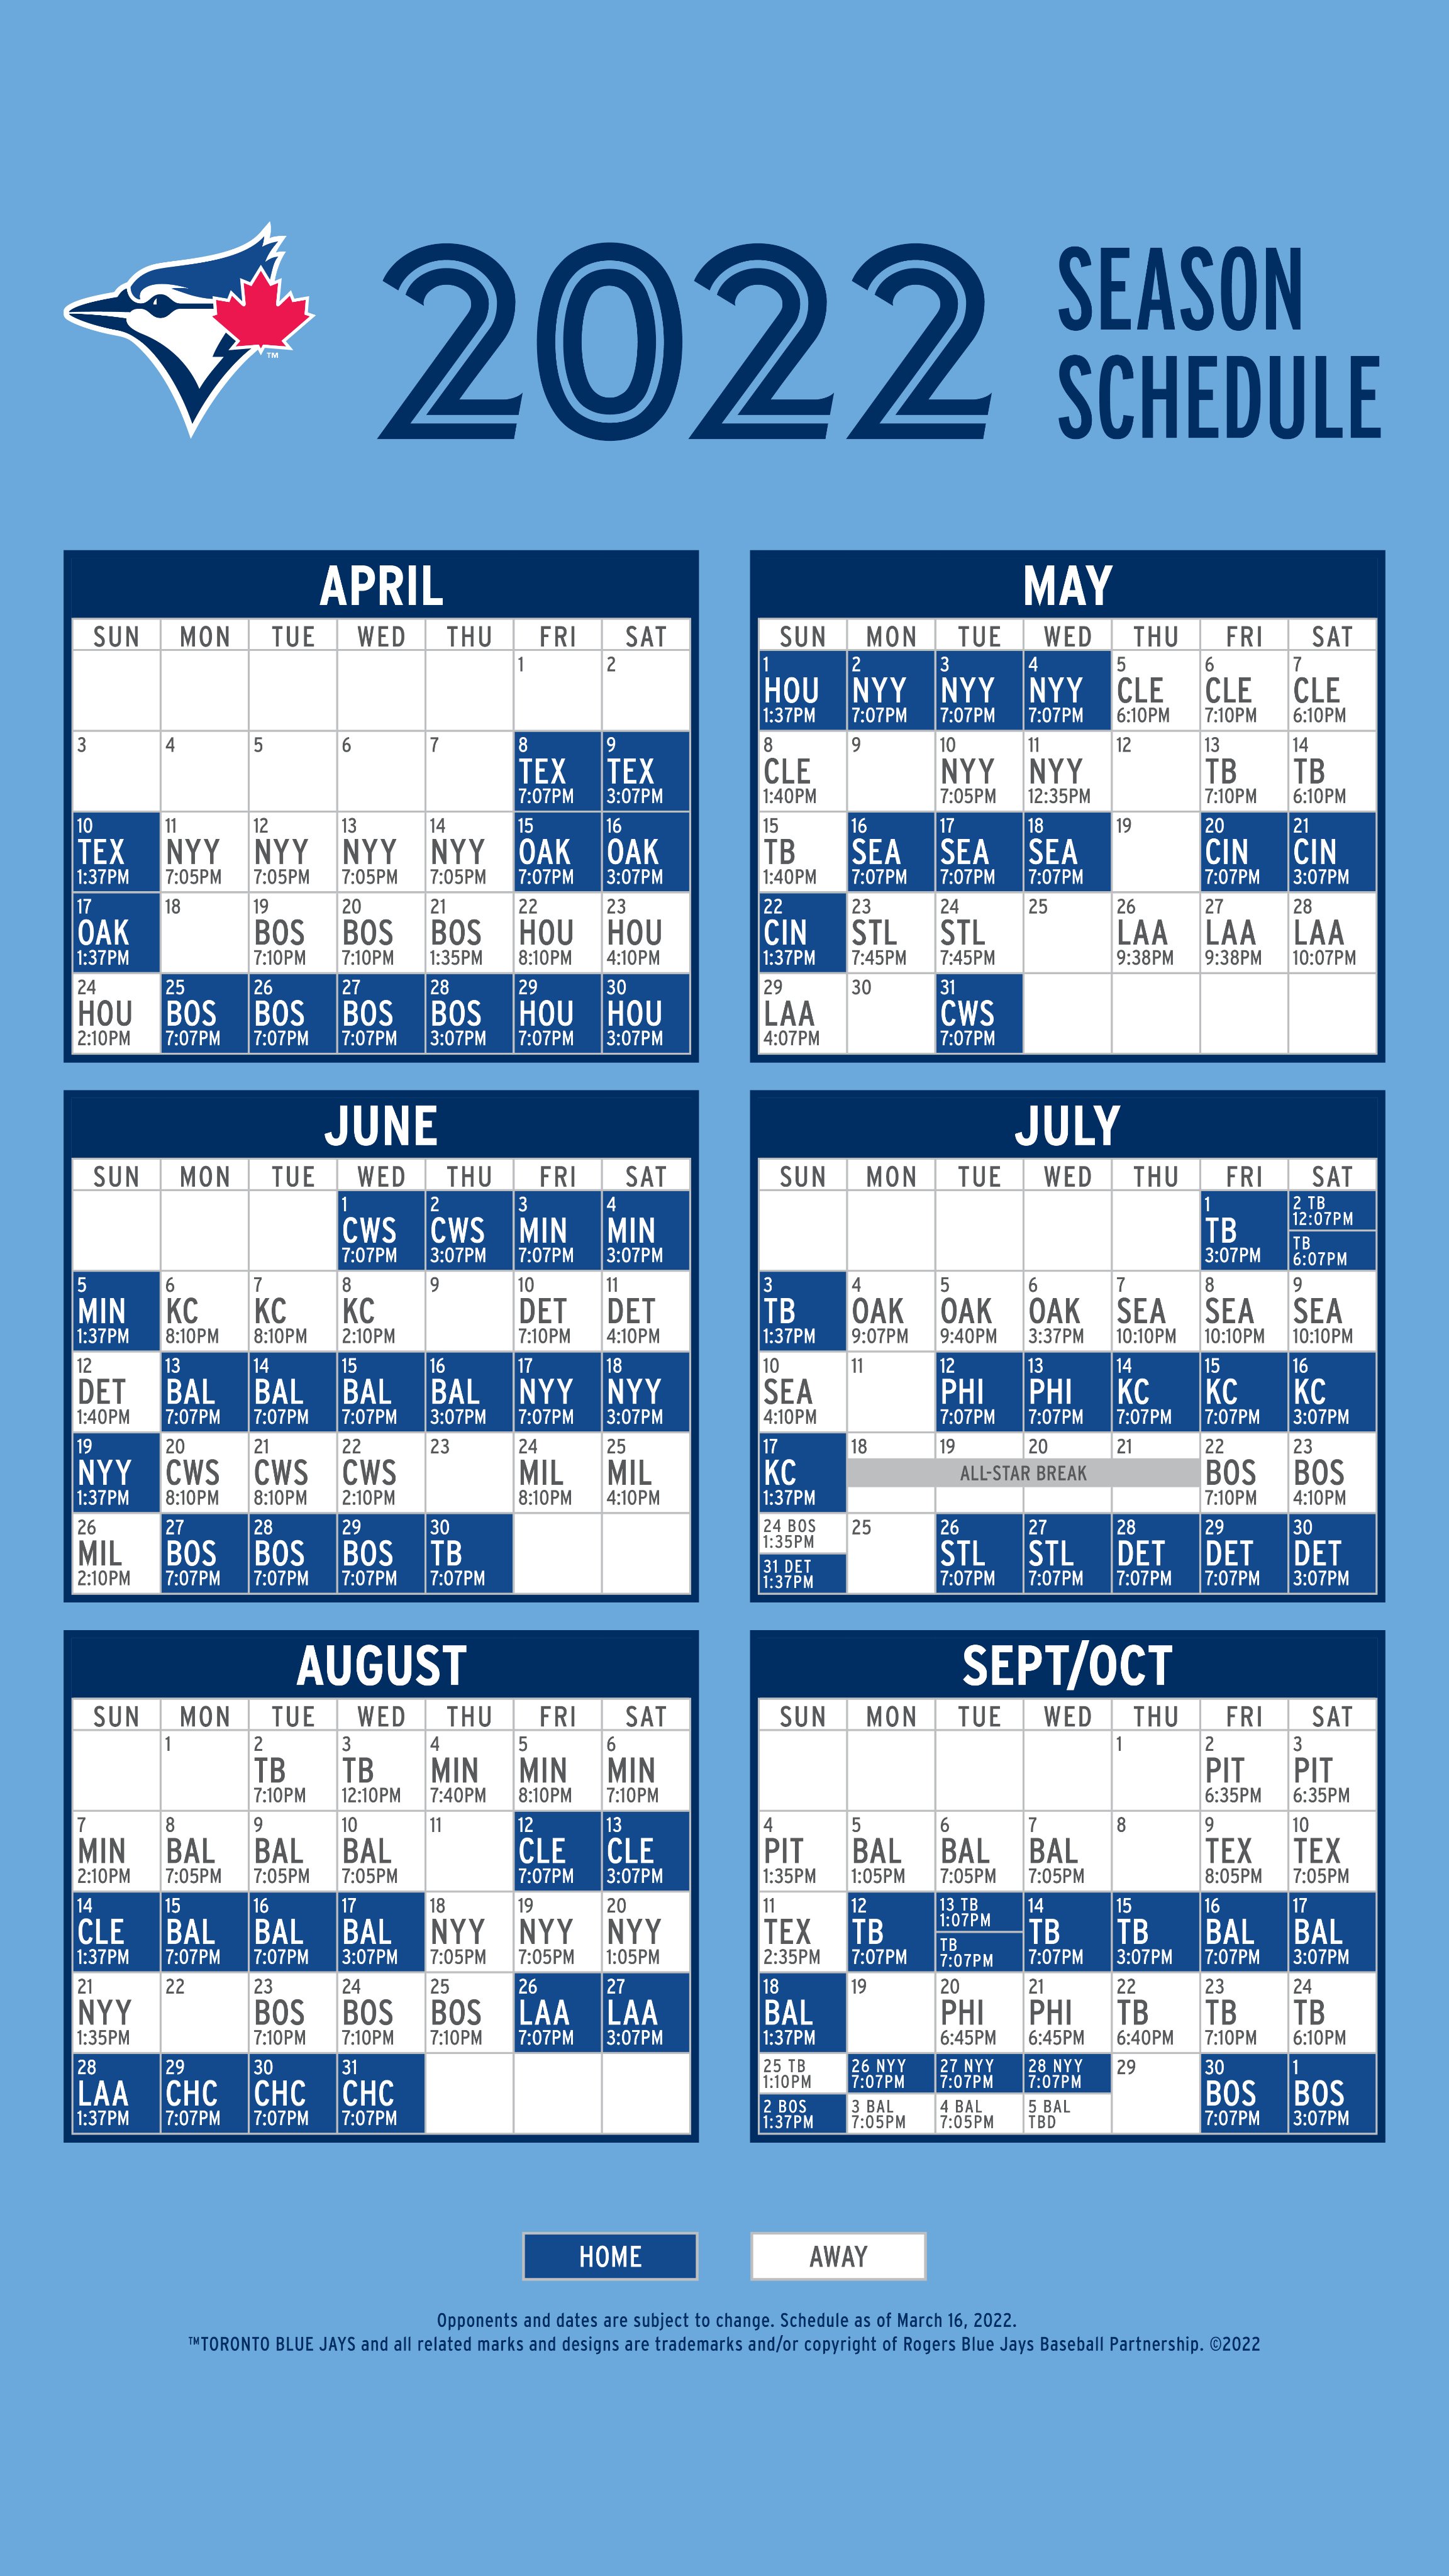 Toronto Blue Jays on Twitter "Presenting our updated 2022 schedule